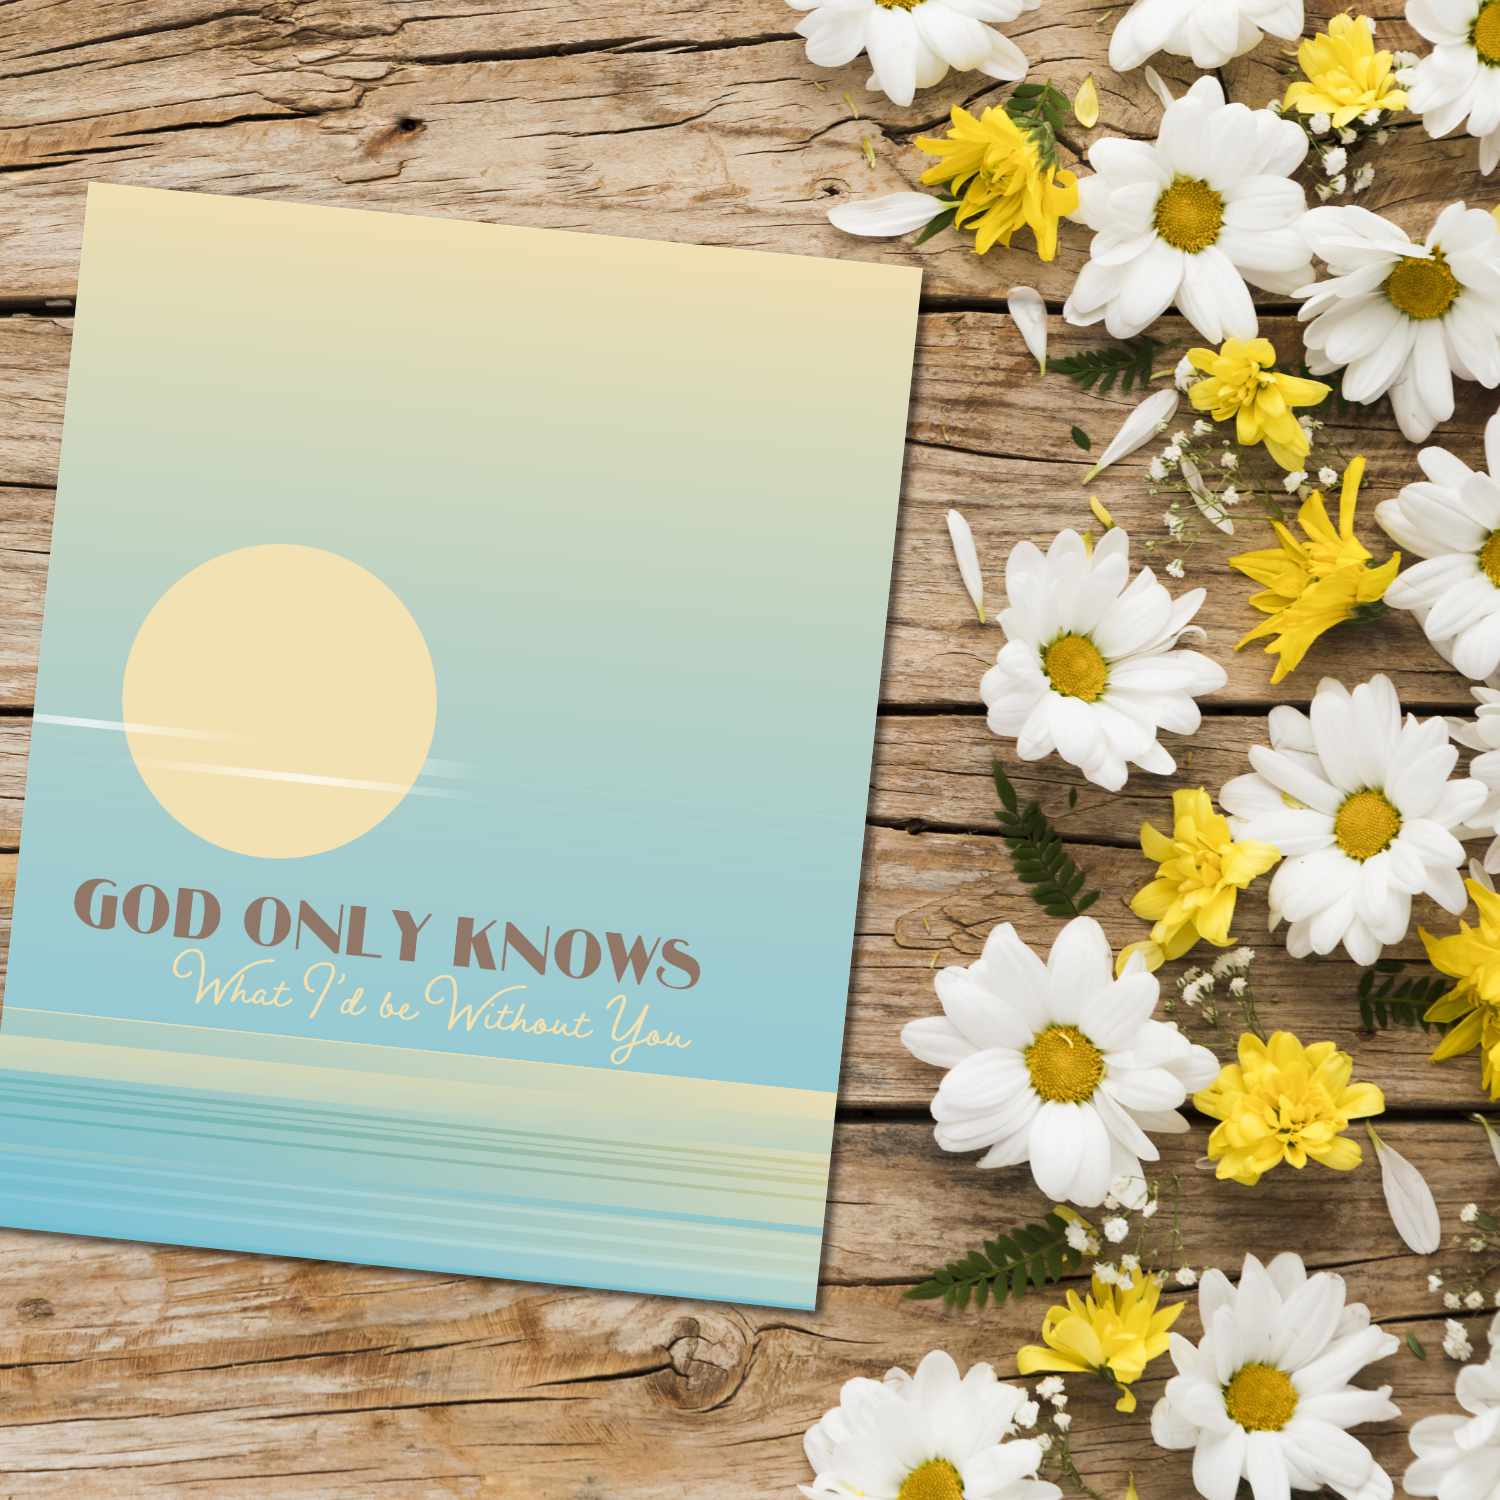 God Only Knows by the Beach Boys - Song Lyric Wall Art Song Lyrics Art Song Lyrics Art 8x10 unframed Print 